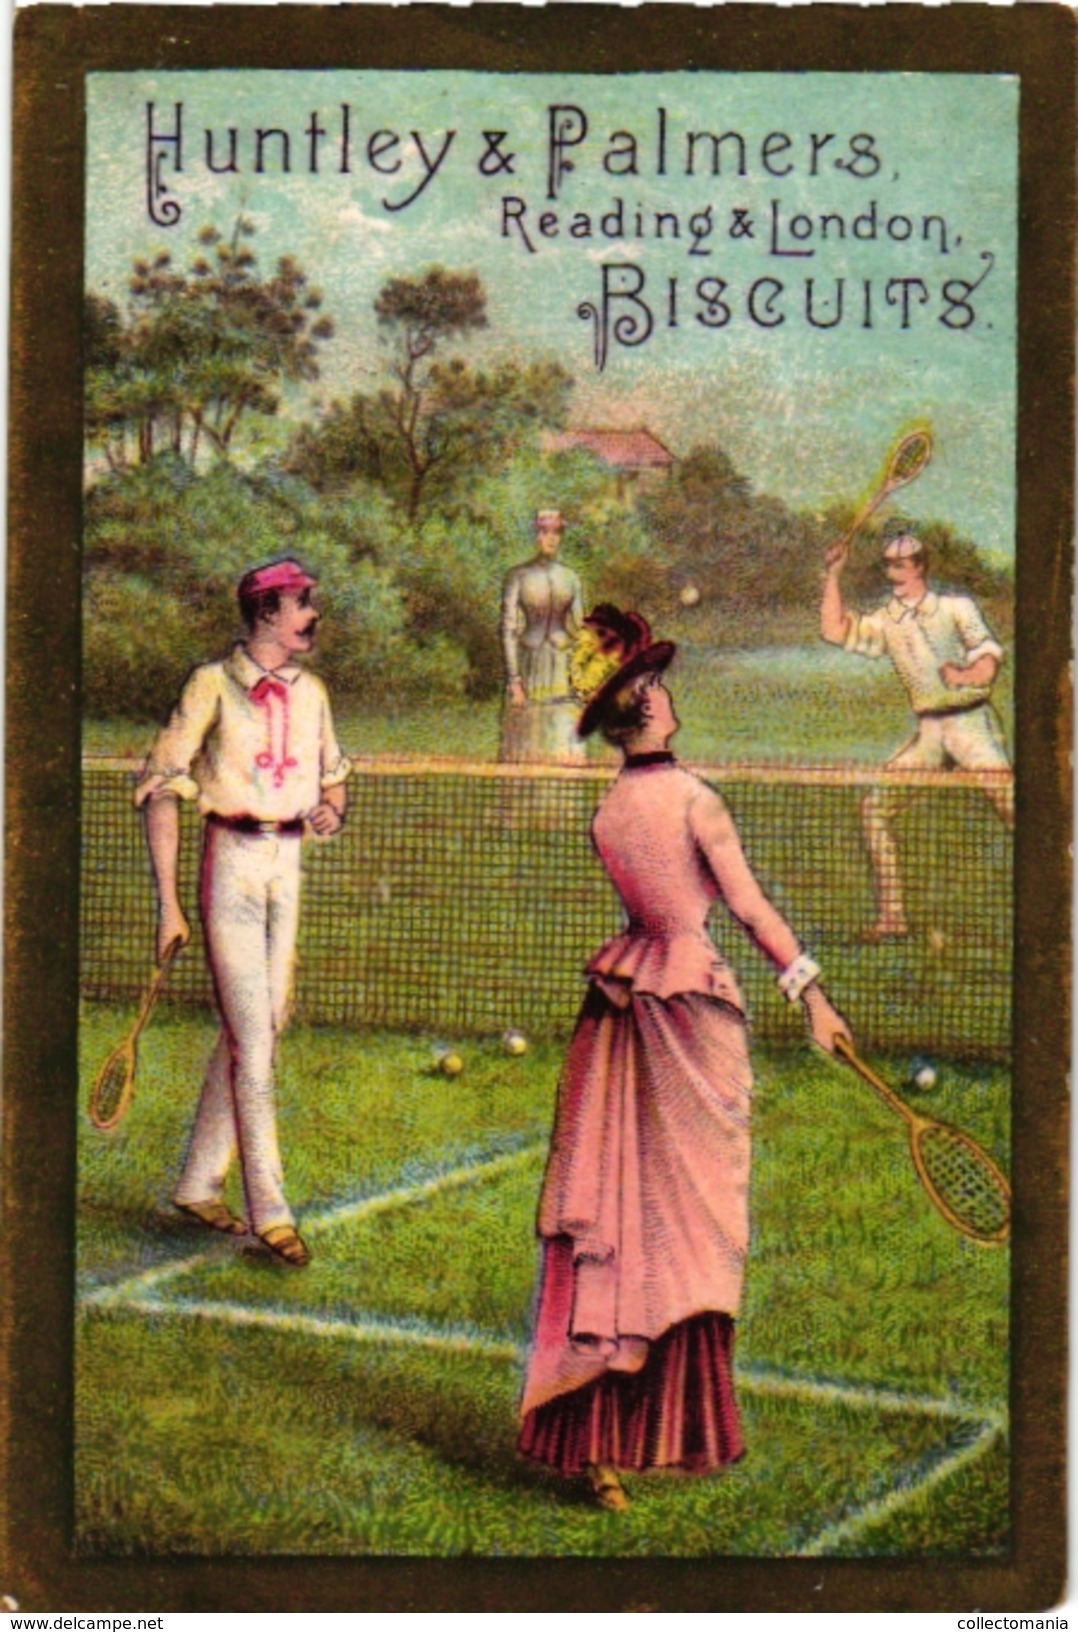 3 Cards C1900 Pub Huntley & Palmers Biscuits -  Lawn - Tennis Court - Sport Cards - More Than 100 Year Old VG - Trading Cards